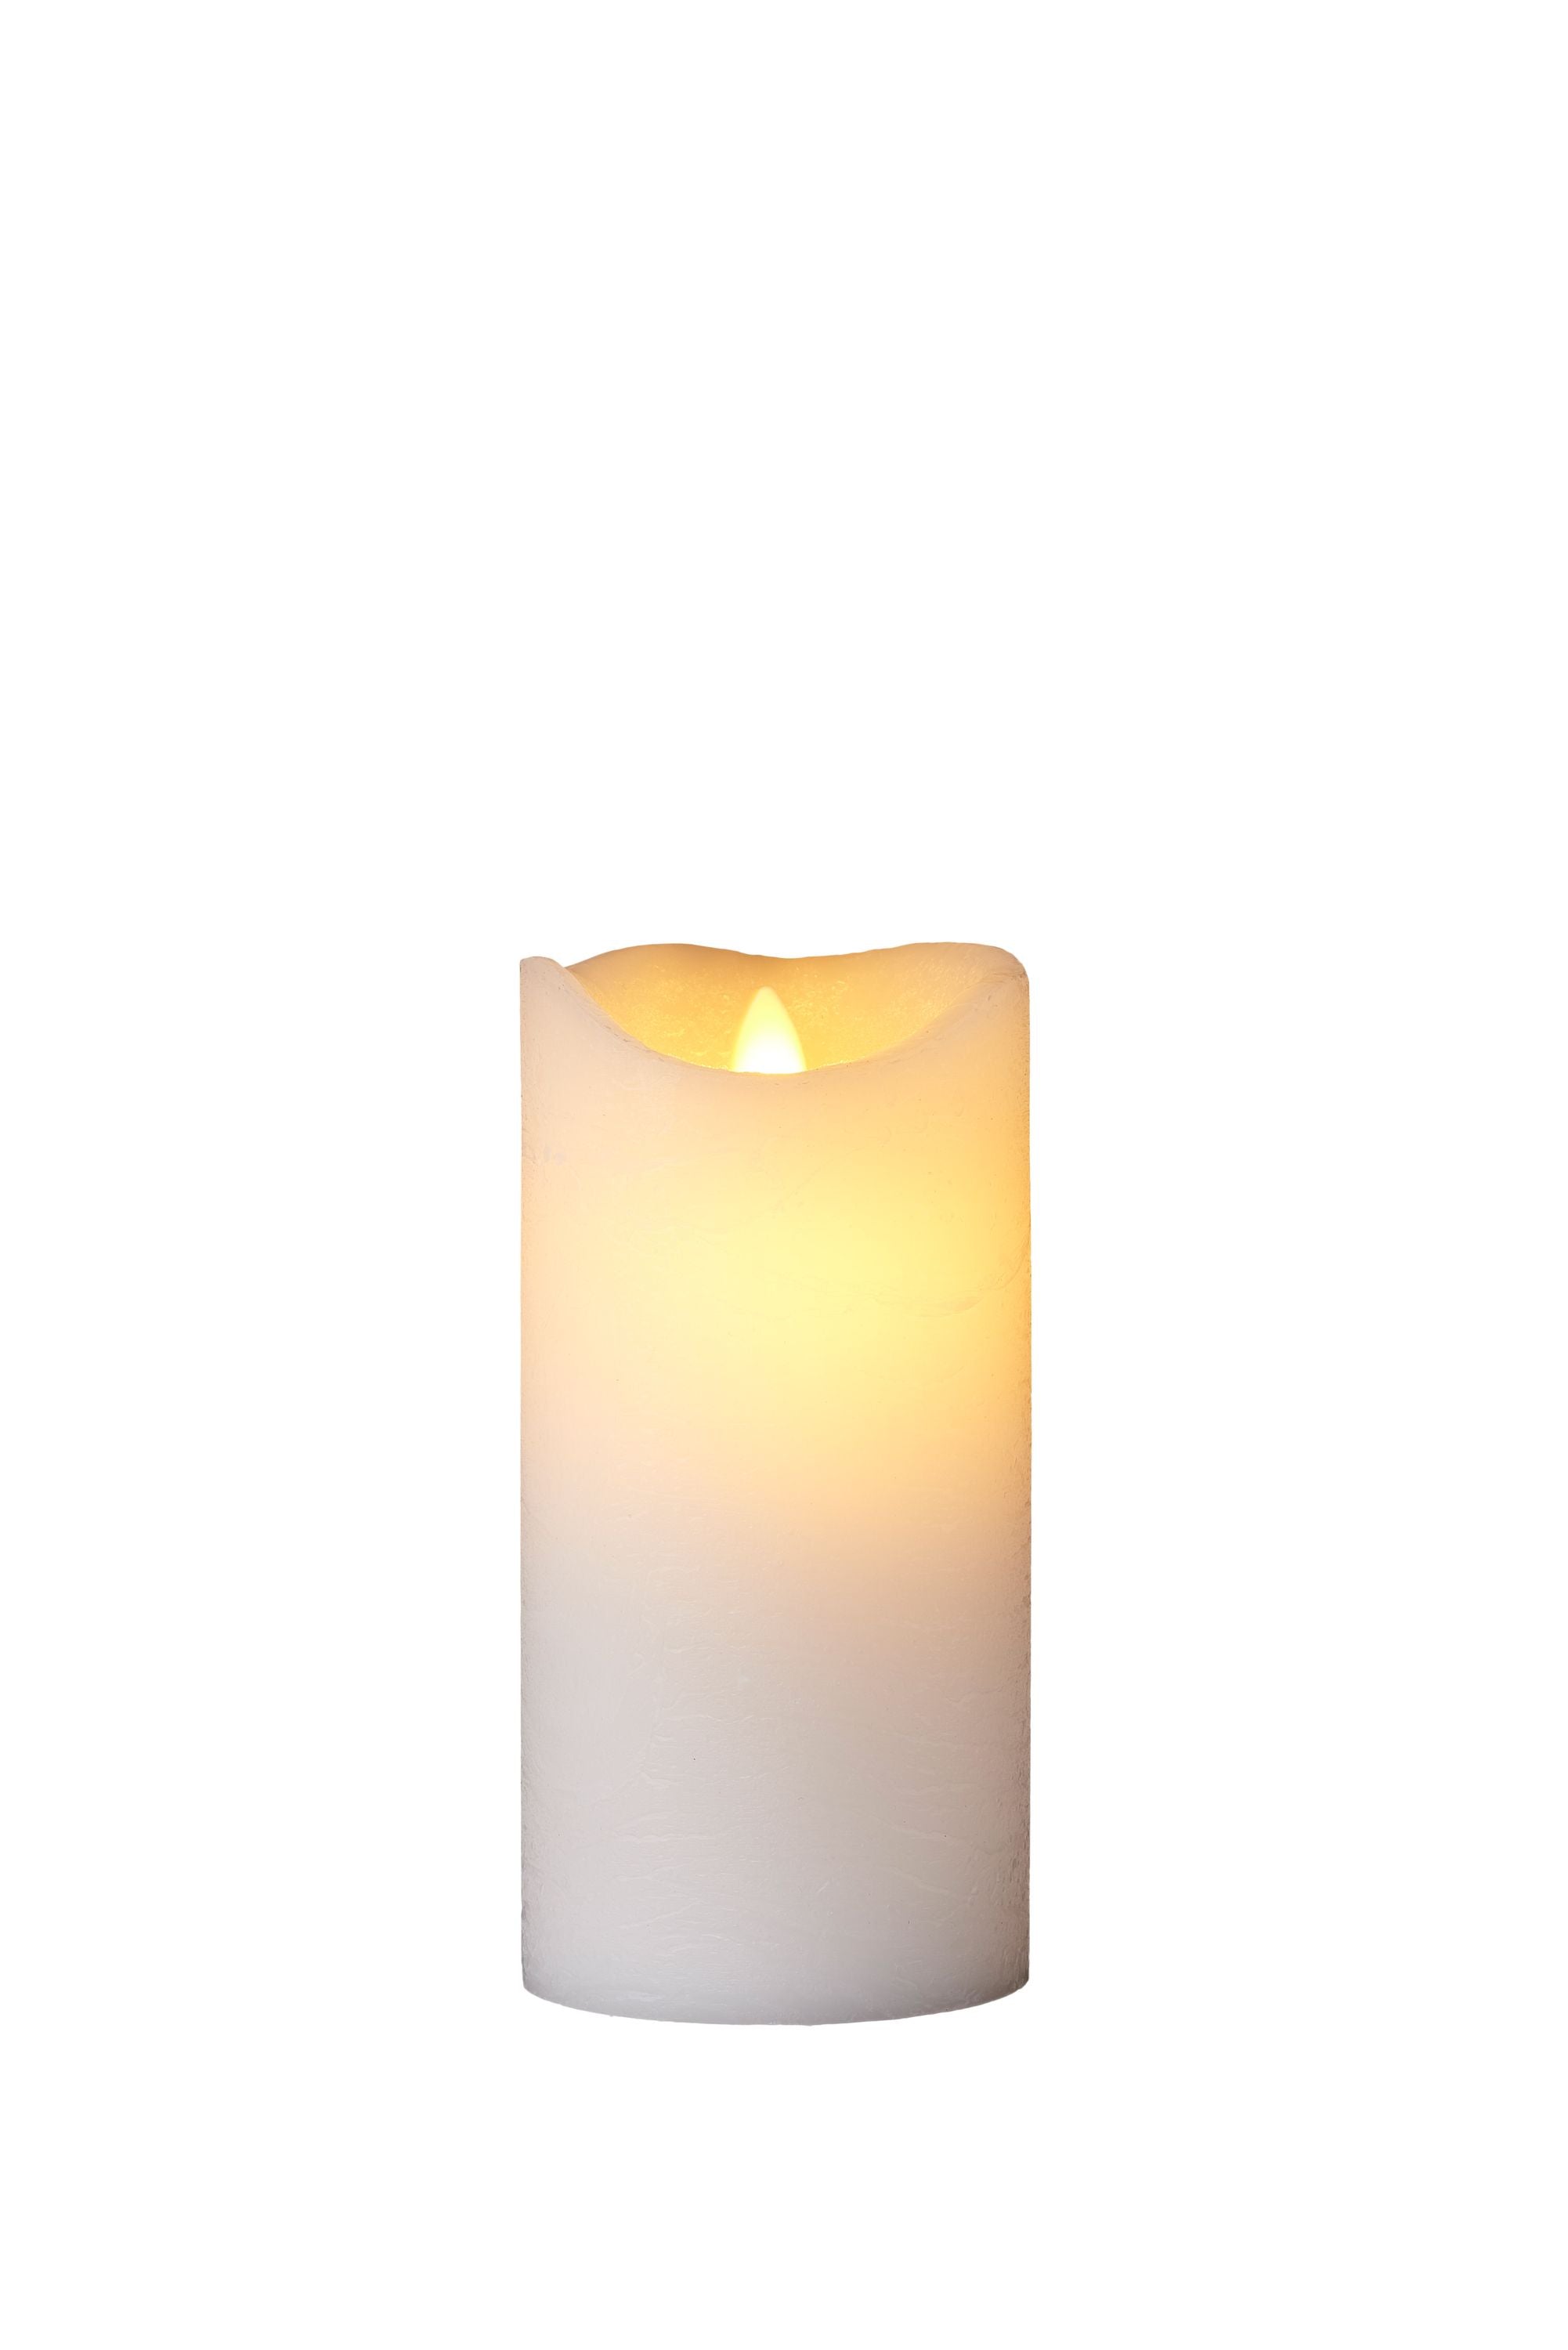 Sirius Sara Rechargeable Led Candle White, ø7,5x H15cm